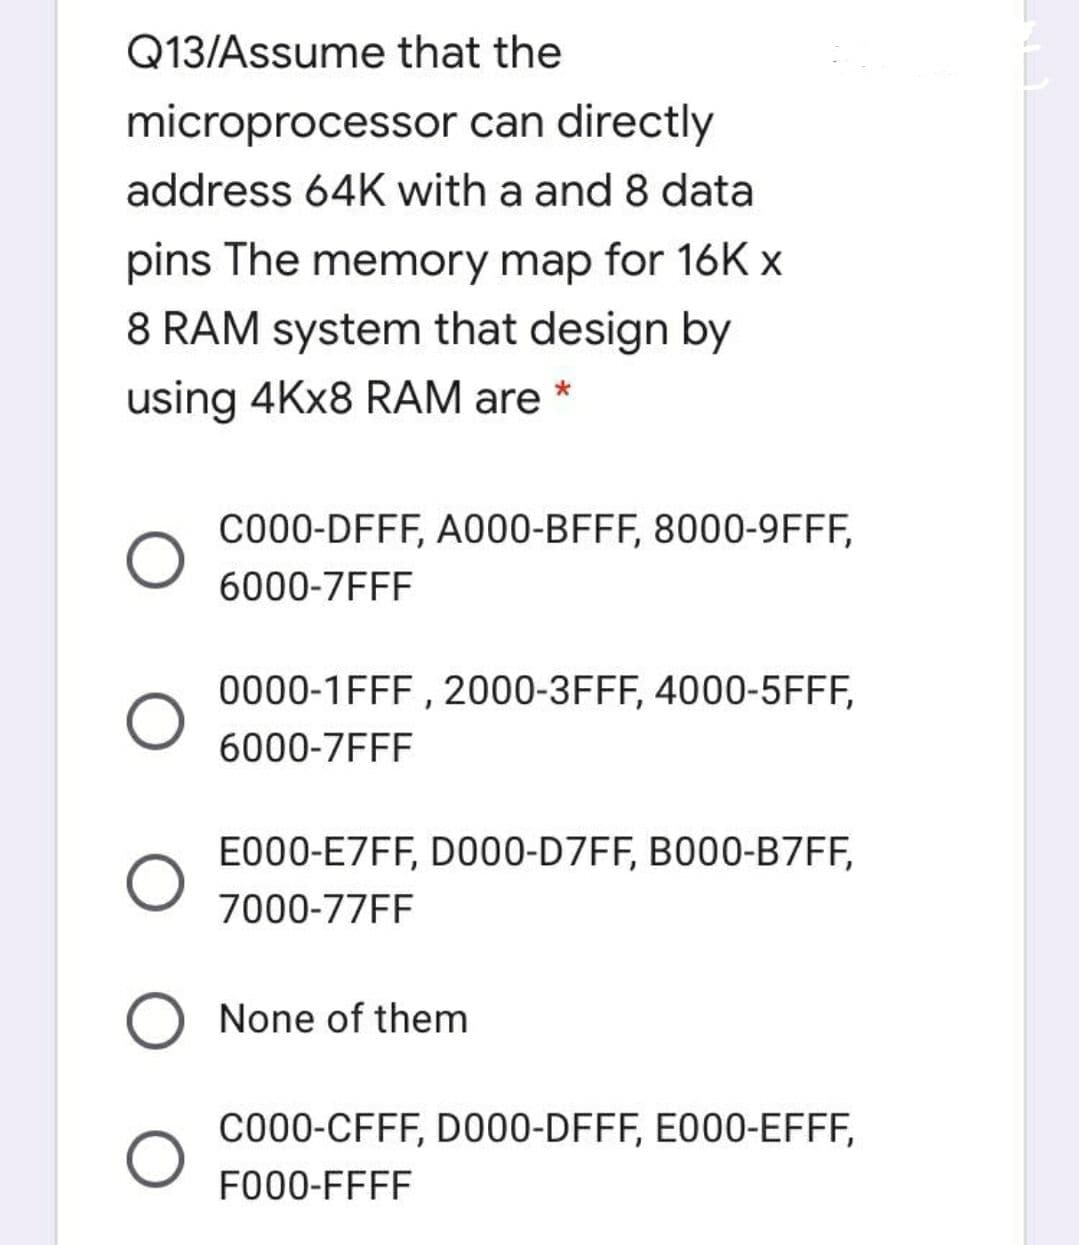 Q13/Assume that the
microprocessor can directly
address 64K with a and 8 data
pins The memory map for 16K x
8 RAM system that design by
using 4KX8 RAM are *
C000-DFFF, A000-BFFF, 8000-9FFF,
6000-7FFF
0000-1FFF , 2000-3FFF, 4000-5FFF,
6000-7FFF
E000-E7FF, DO00-D7FF, B000-B7FF,
7000-77FF
None of them
C000-CFFF, D000-DFFF, E000-EFFF,
FO00-FFFF
